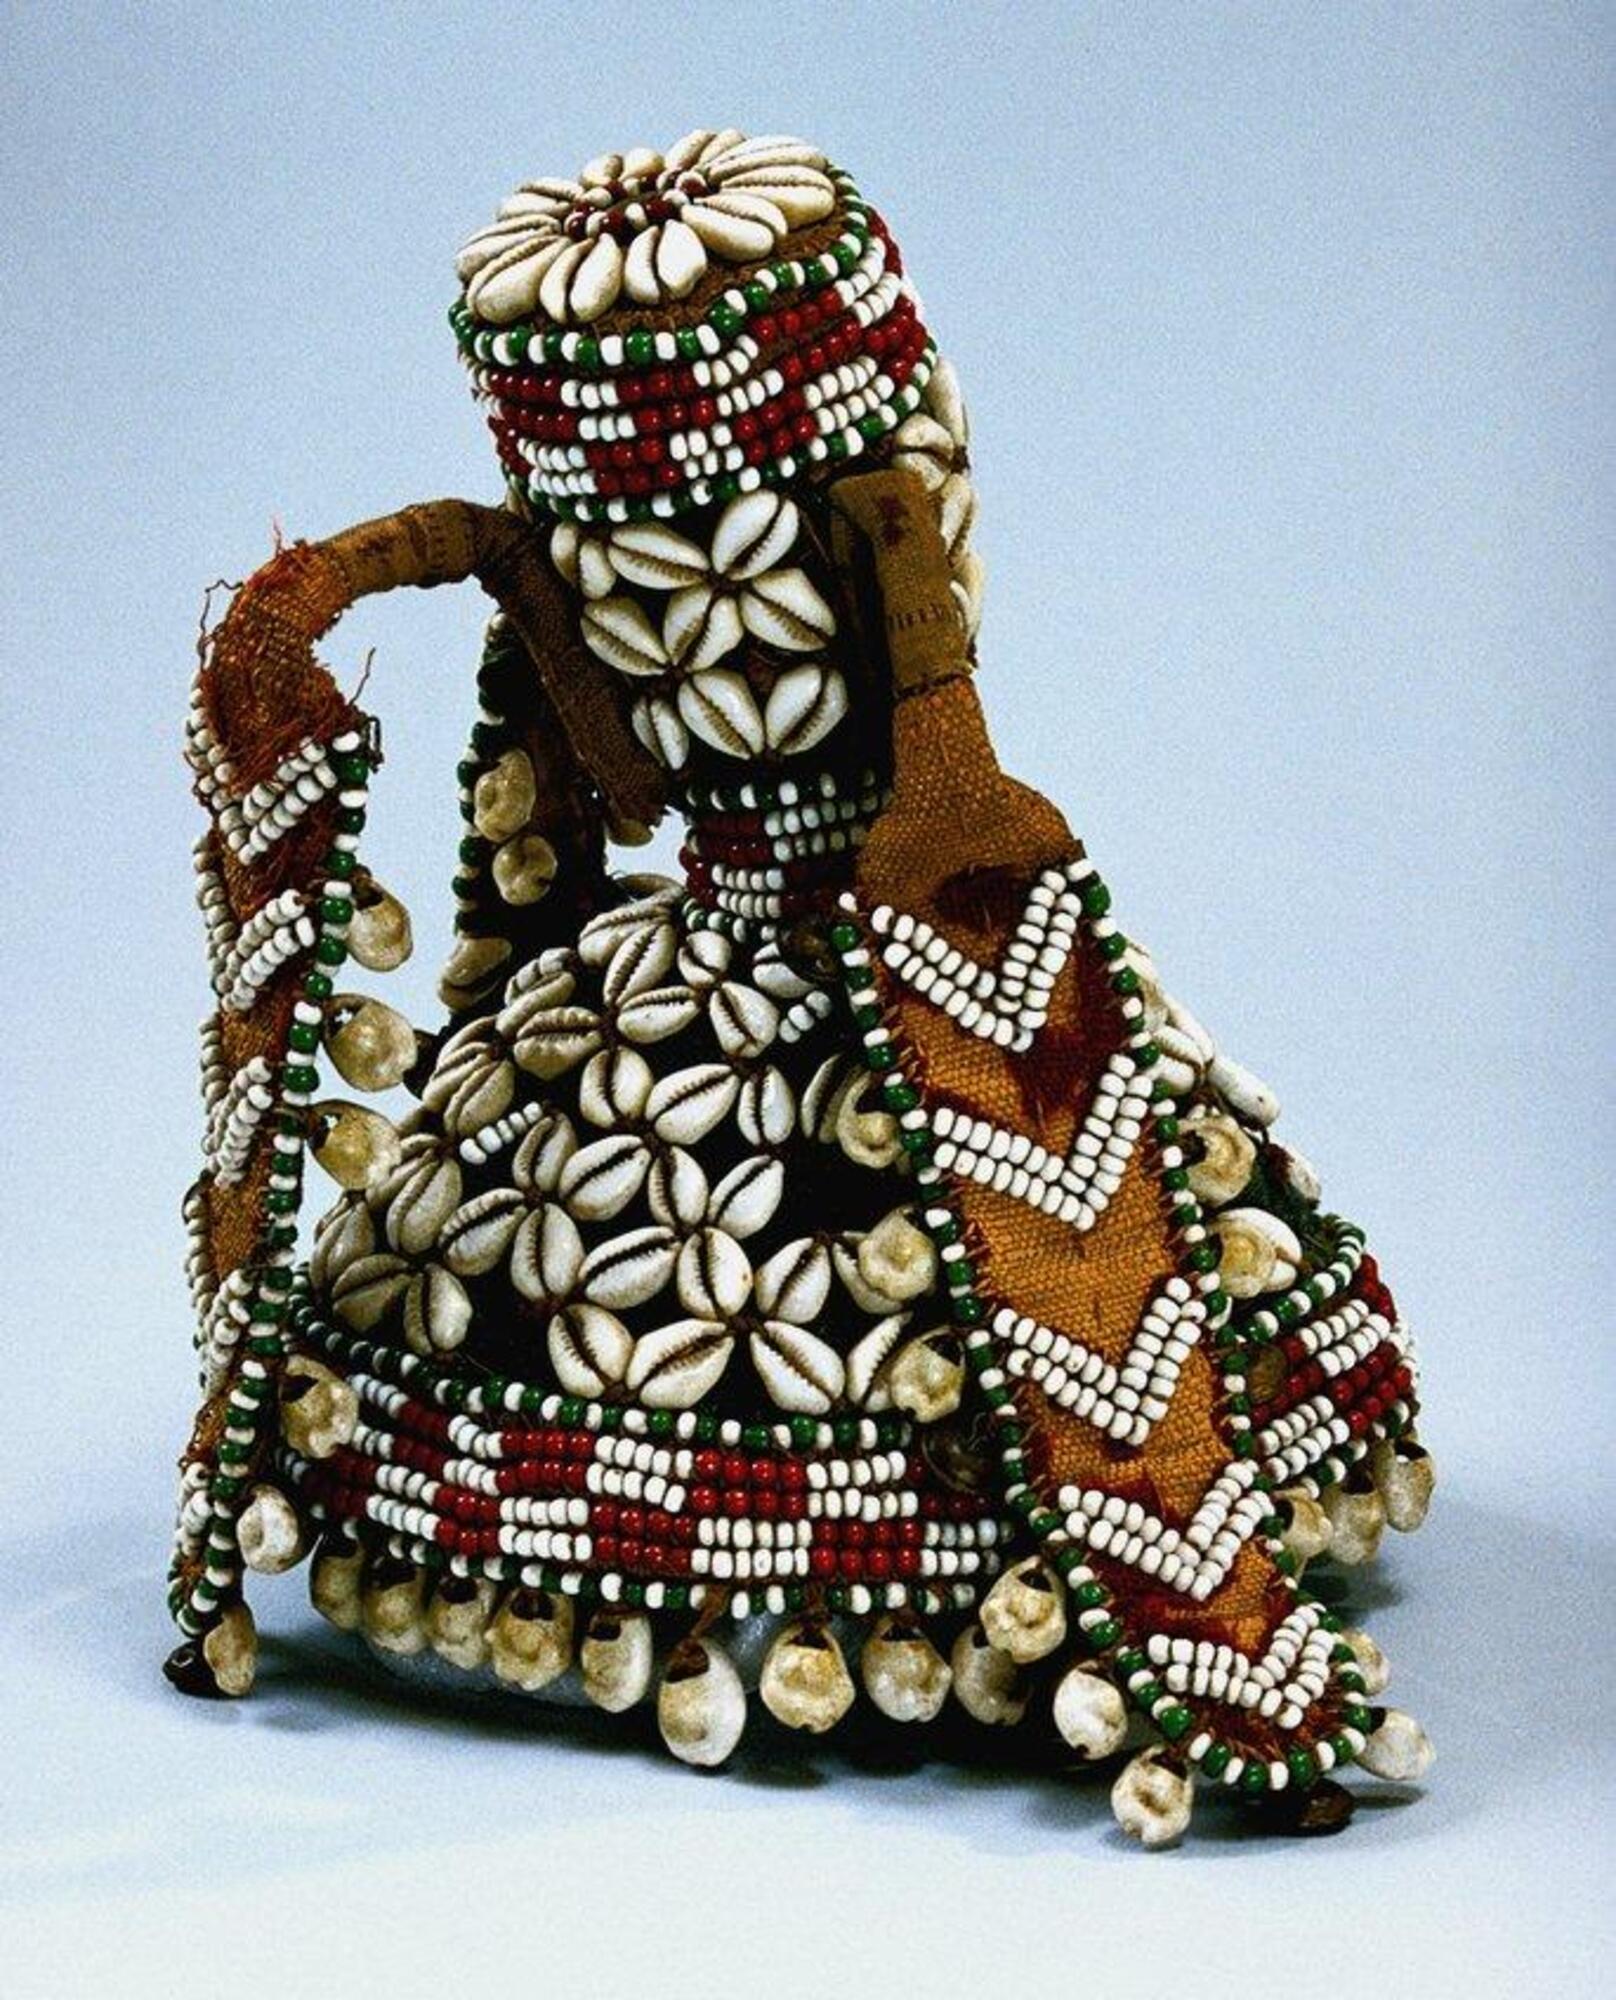 A cone-shaped headdress with a cylindrical finial rising from its top. Three long flaps hang from three projections located near the top of the finial. The green field of the main body and finial is embroidered with cowrie shells arranged in a four-pointed rosette pattern. Cowries also appear on the round flat top of the finial where they radiate around a circle of alternating red and white beads. Cowries form a fringe around the lower border of the cap and are accompanied by brass bells along the edges of the flaps. The headdress is bordered at its lower edge and at the top and bottom of the finial with a checkerboard pattern in red and white beads between thin rows of alternating green and white beads. Five double rows of white beads form a chevron pattern on the wheat-colored field of the flaps.